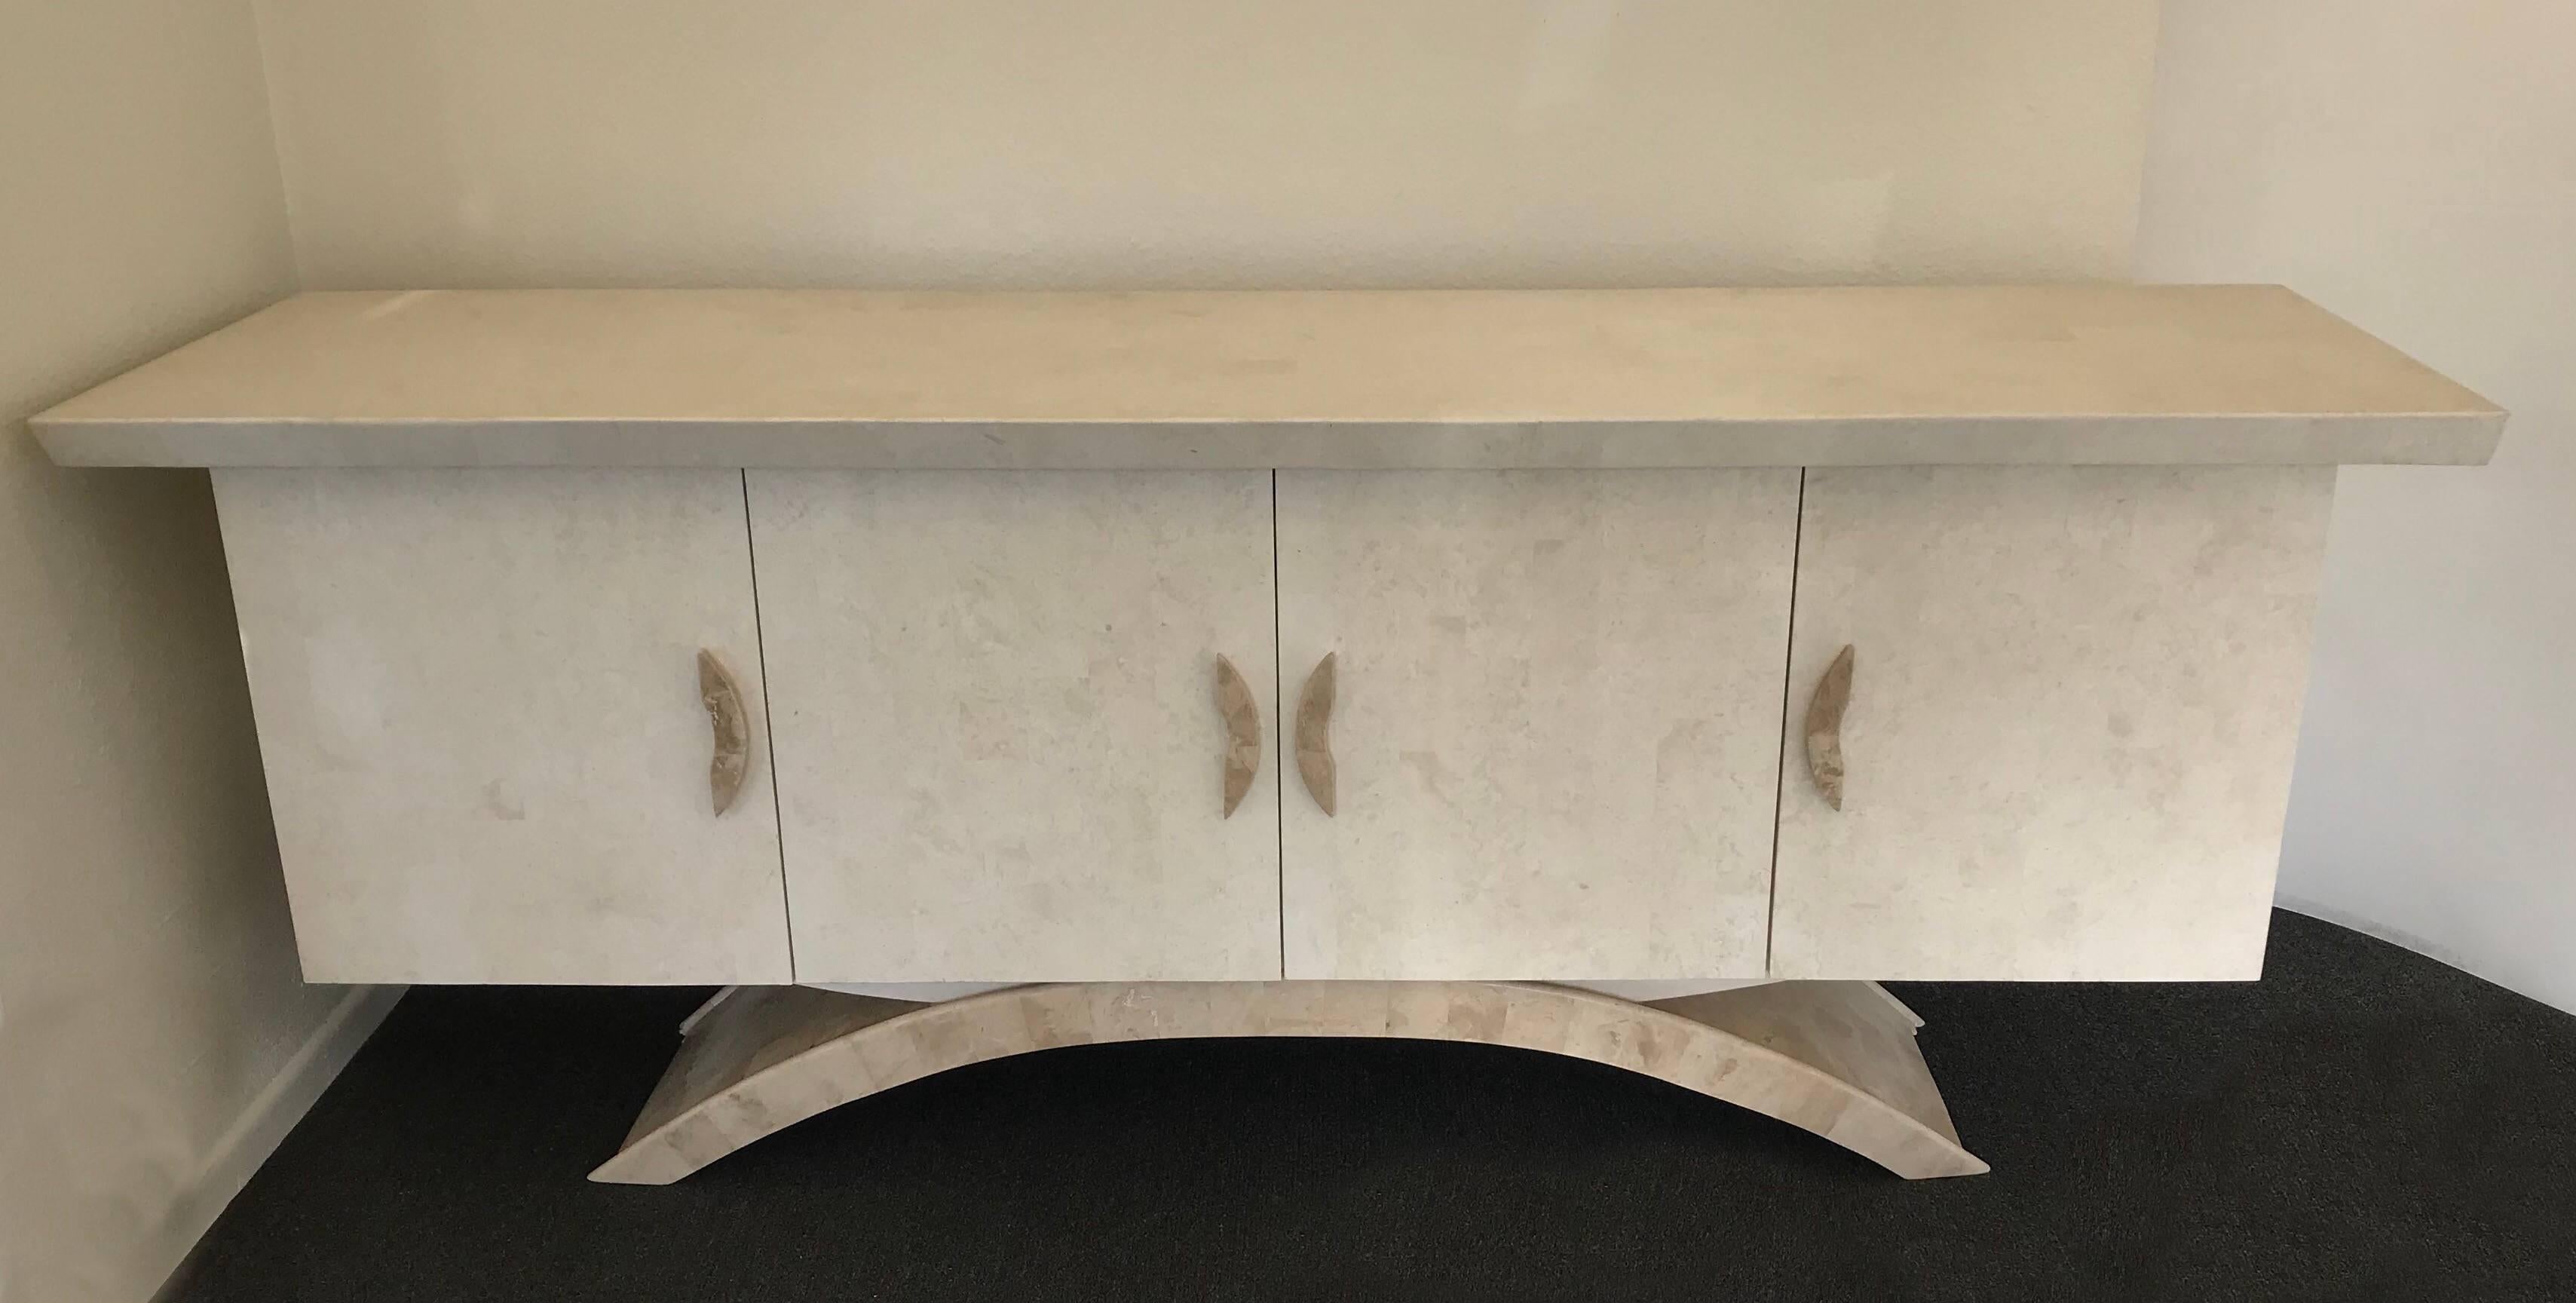 A spectacular 1980s tessellated travertine and fossil handles with a off-white lacquer interior cabinet by Marquis Collection of Beverly Hills.
Dimensions: 85” wide 23.5” deep 34.25” high.